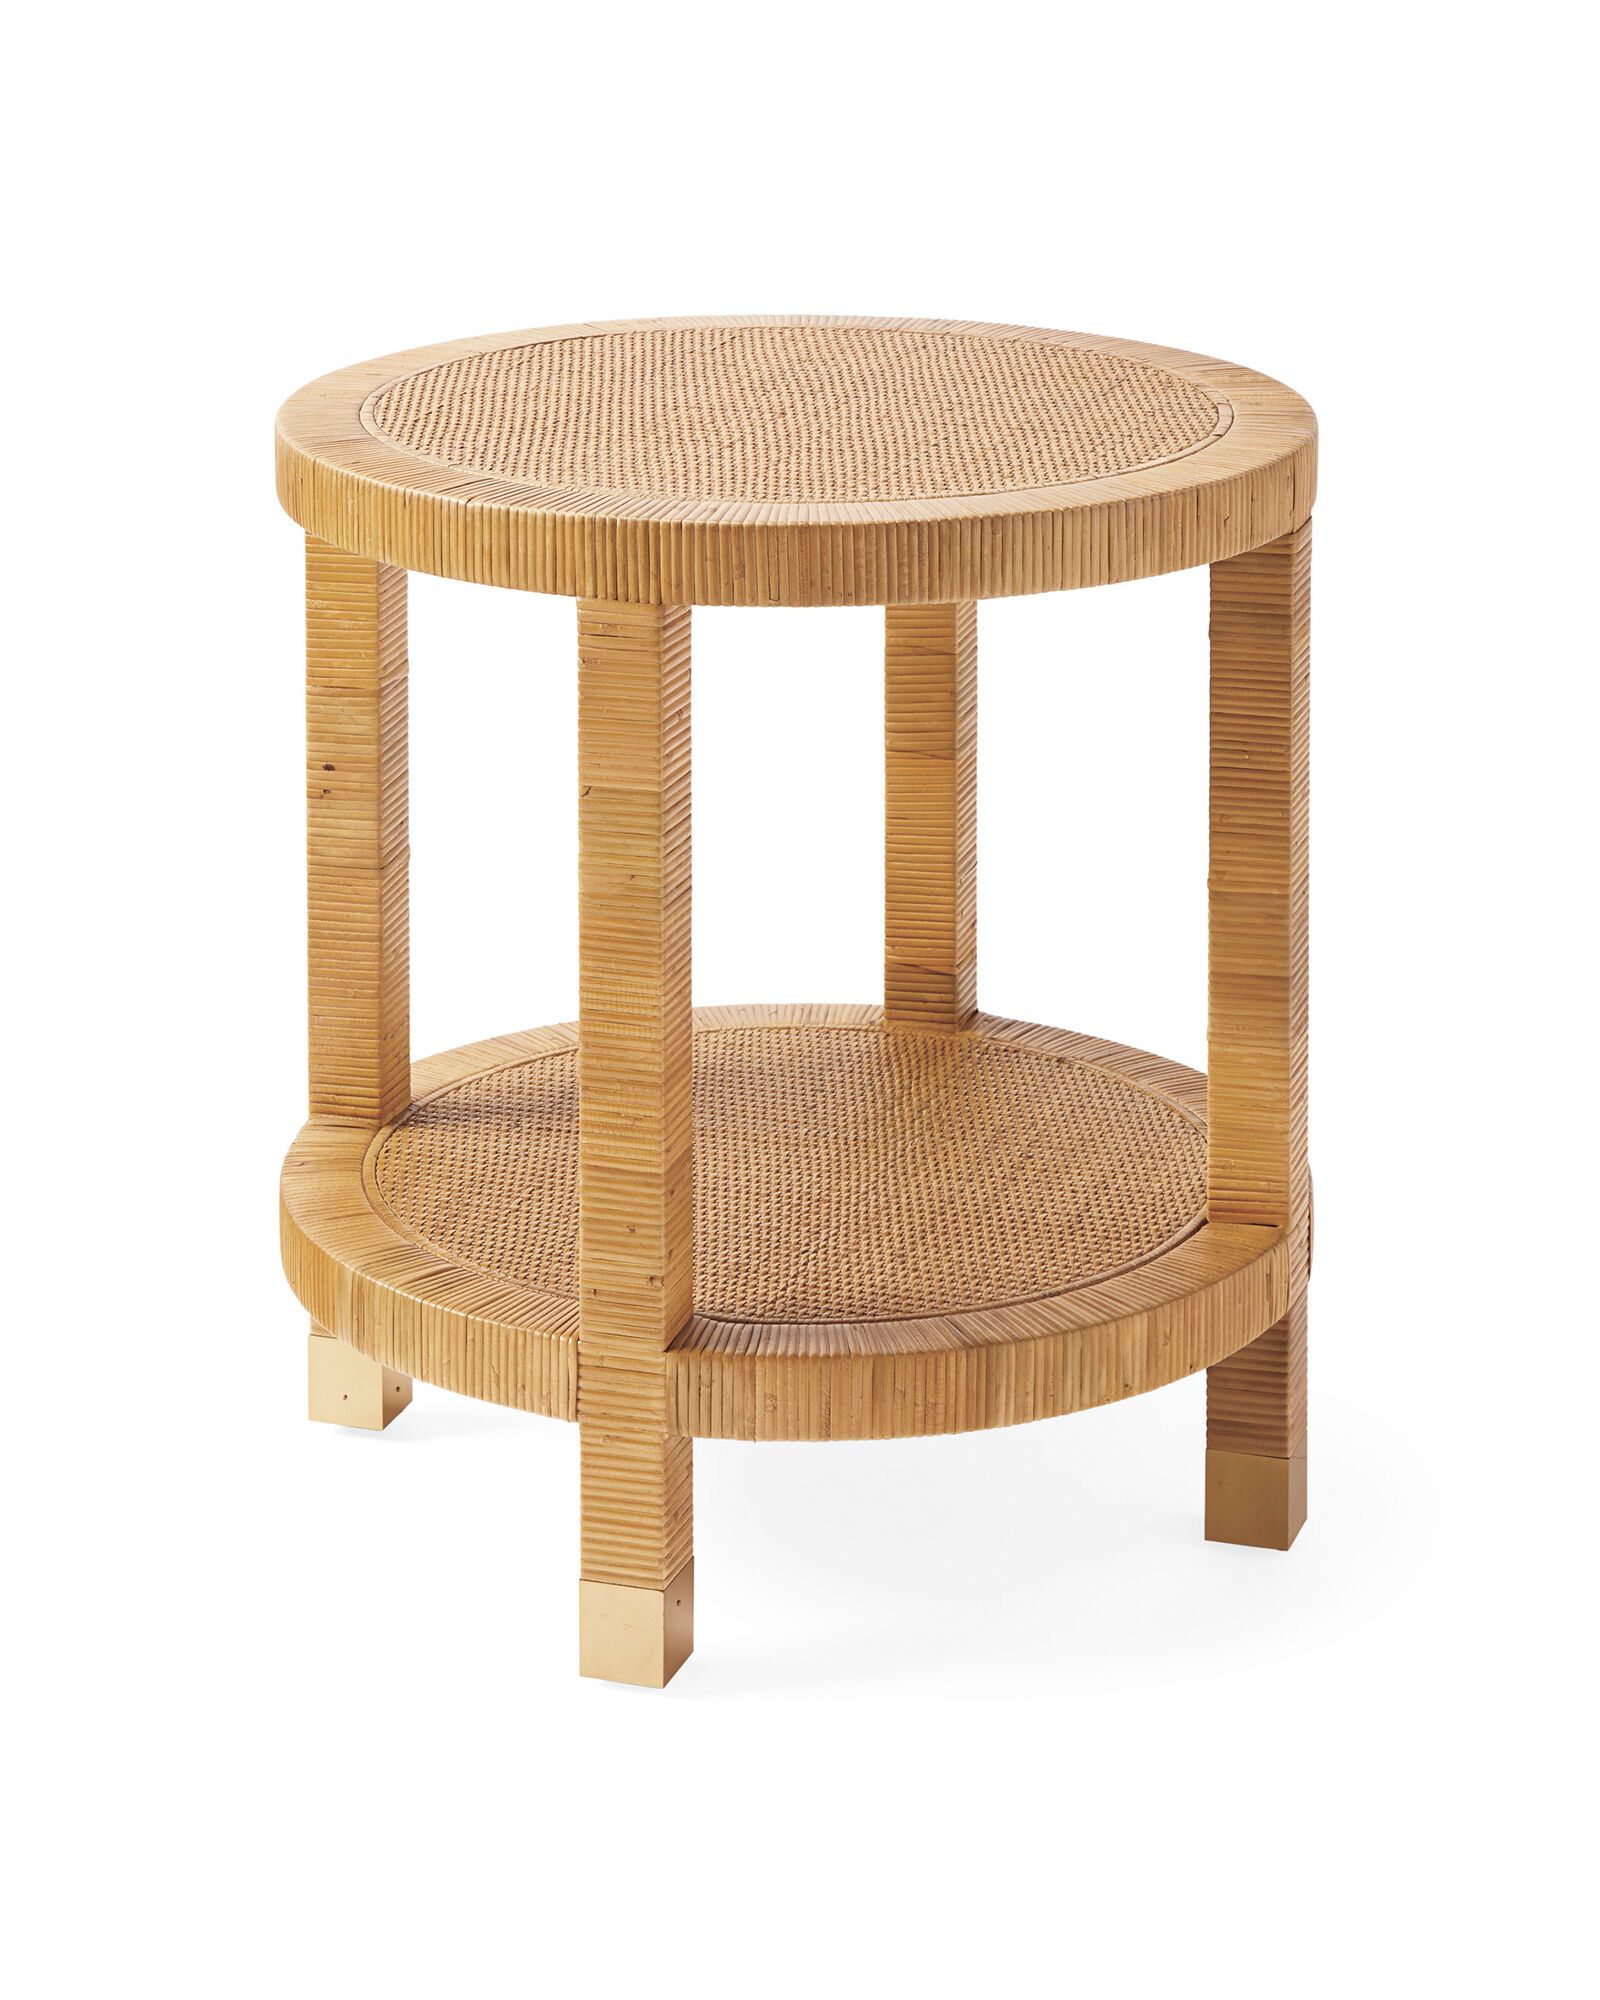 Balboa Rattan Side Table | Serena and Lily